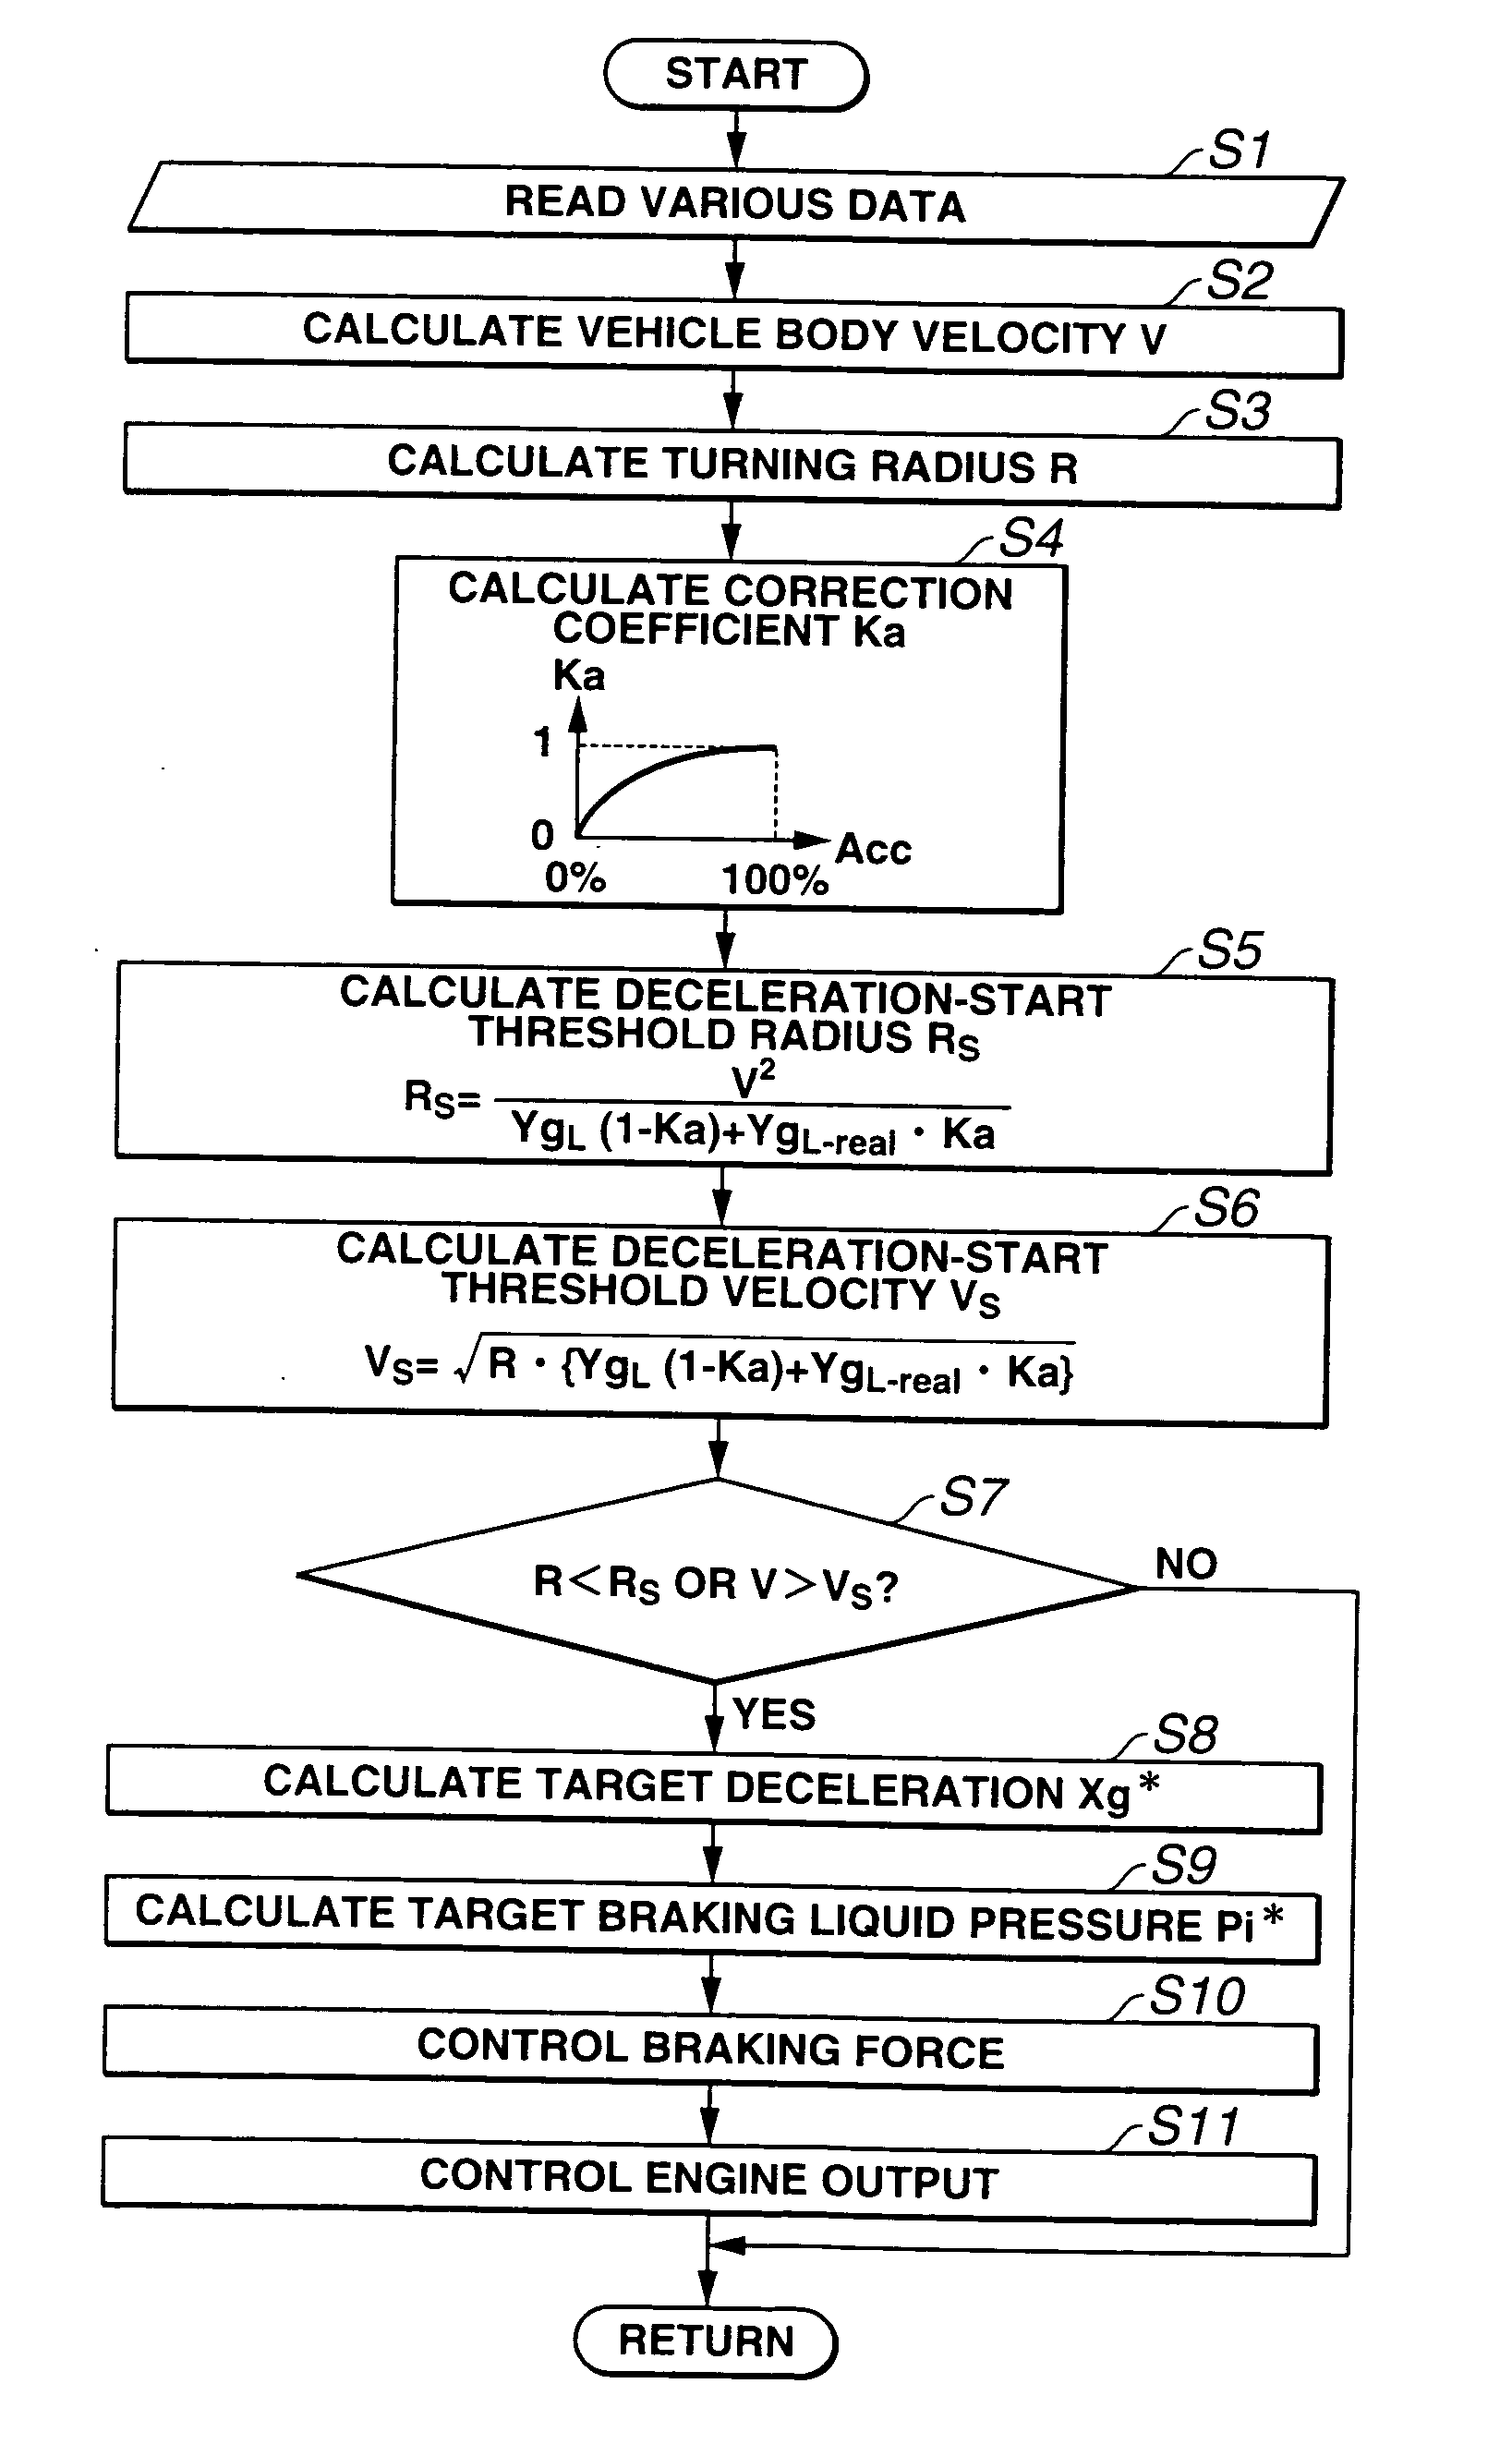 Turning control apparatus and method for automotive vehicle